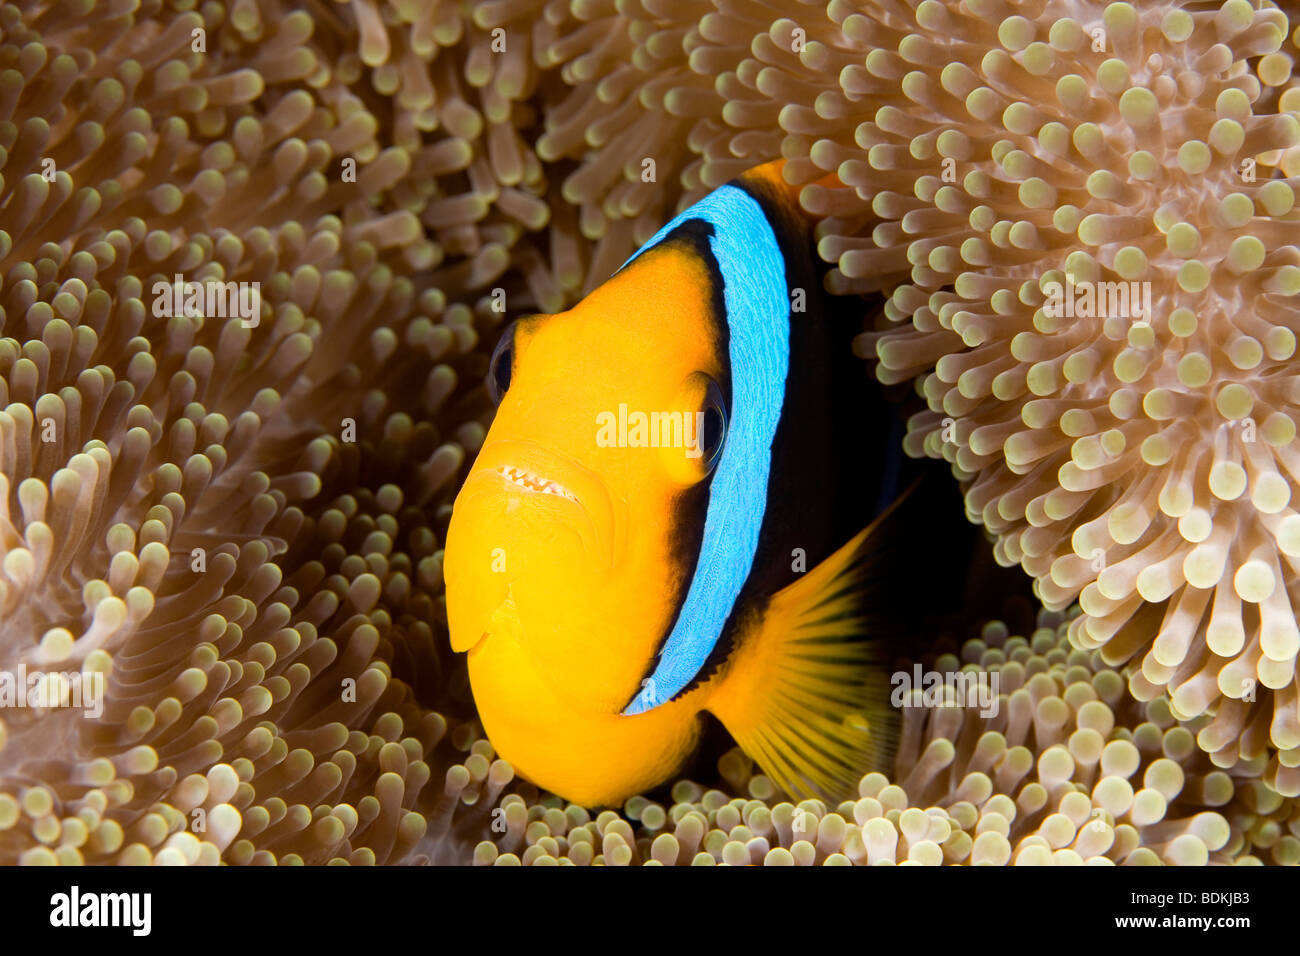 Orange Fin Clownfish,  Amphiprion chrysopterus, sheltering among the tentacles of its anemone. This fish has its mouth open displaying the teeth Stock Photo